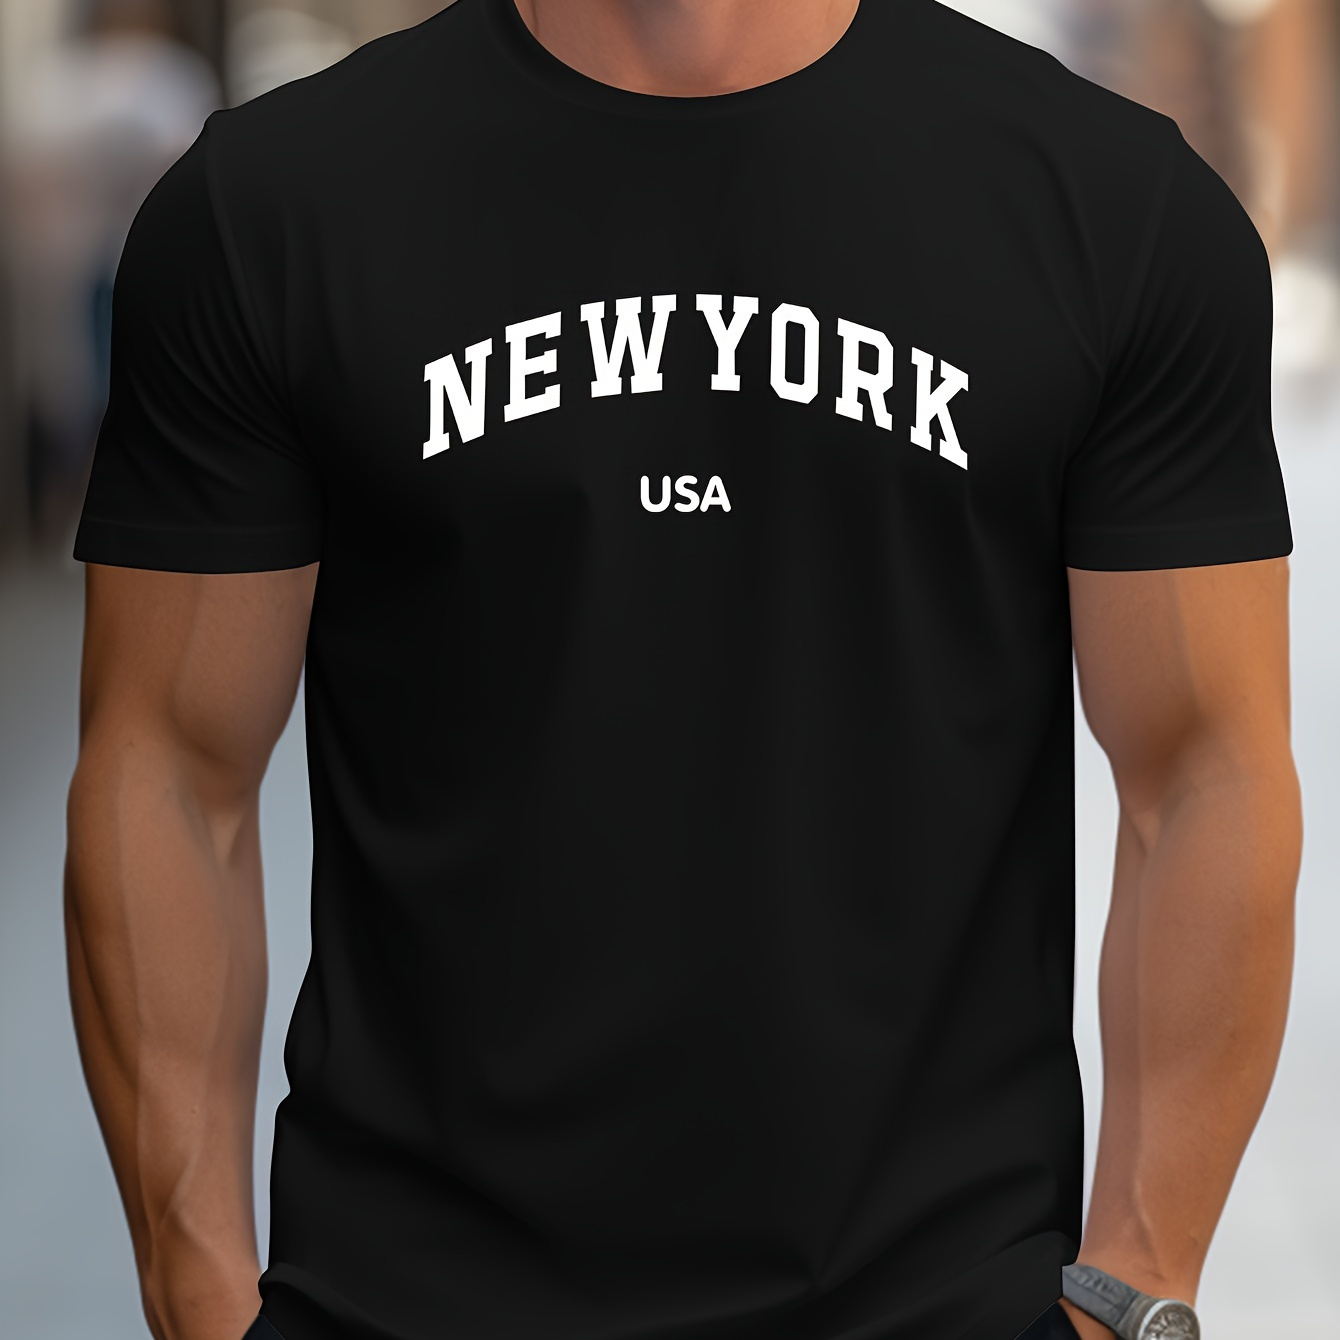 

new York Usa" Print, Men's Novel Design T-shirt, Casual Comfy Tees For Summer, Men's Clothing Tops For Daily Activities